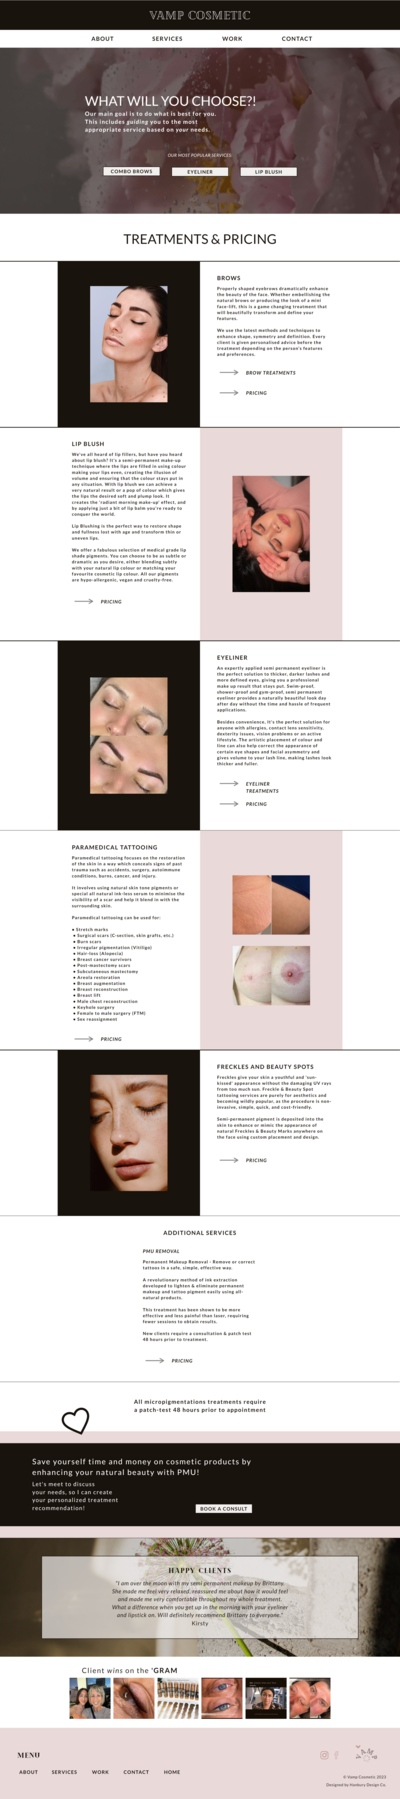 Services website page design for Vamp Cosmetic by Hanbury Design Co.